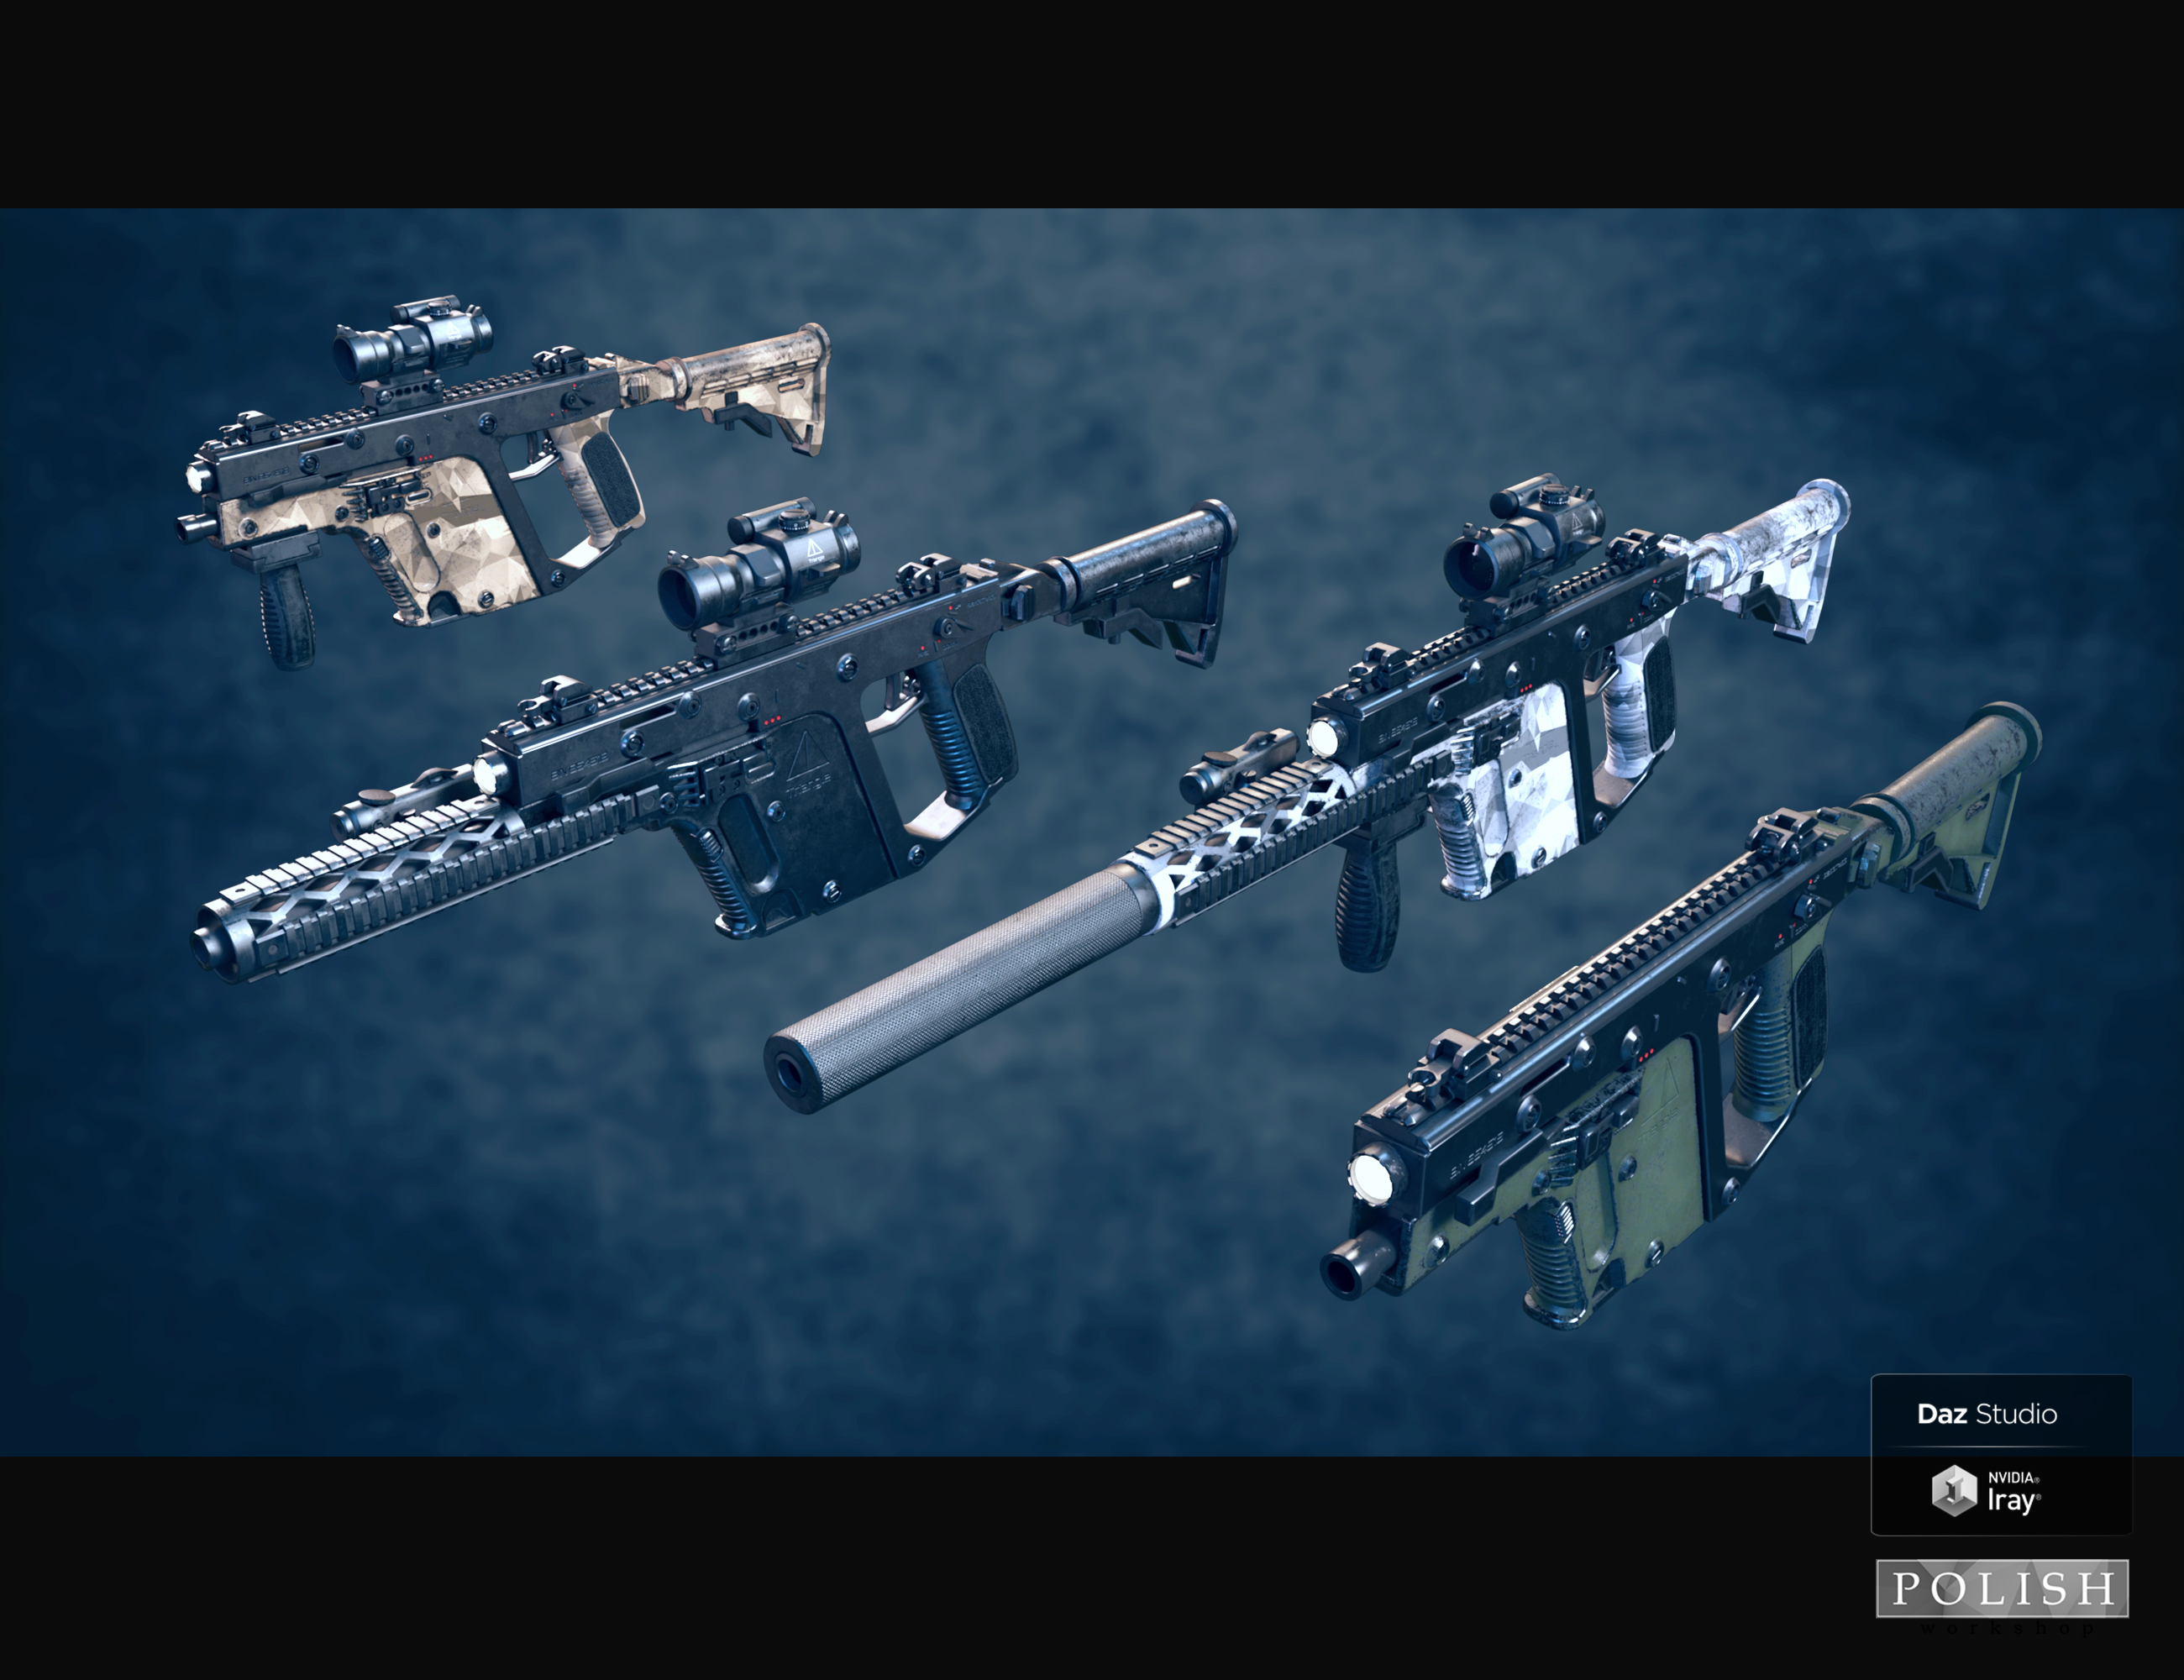 Urban Tactical SMG by: Polish, 3D Models by Daz 3D